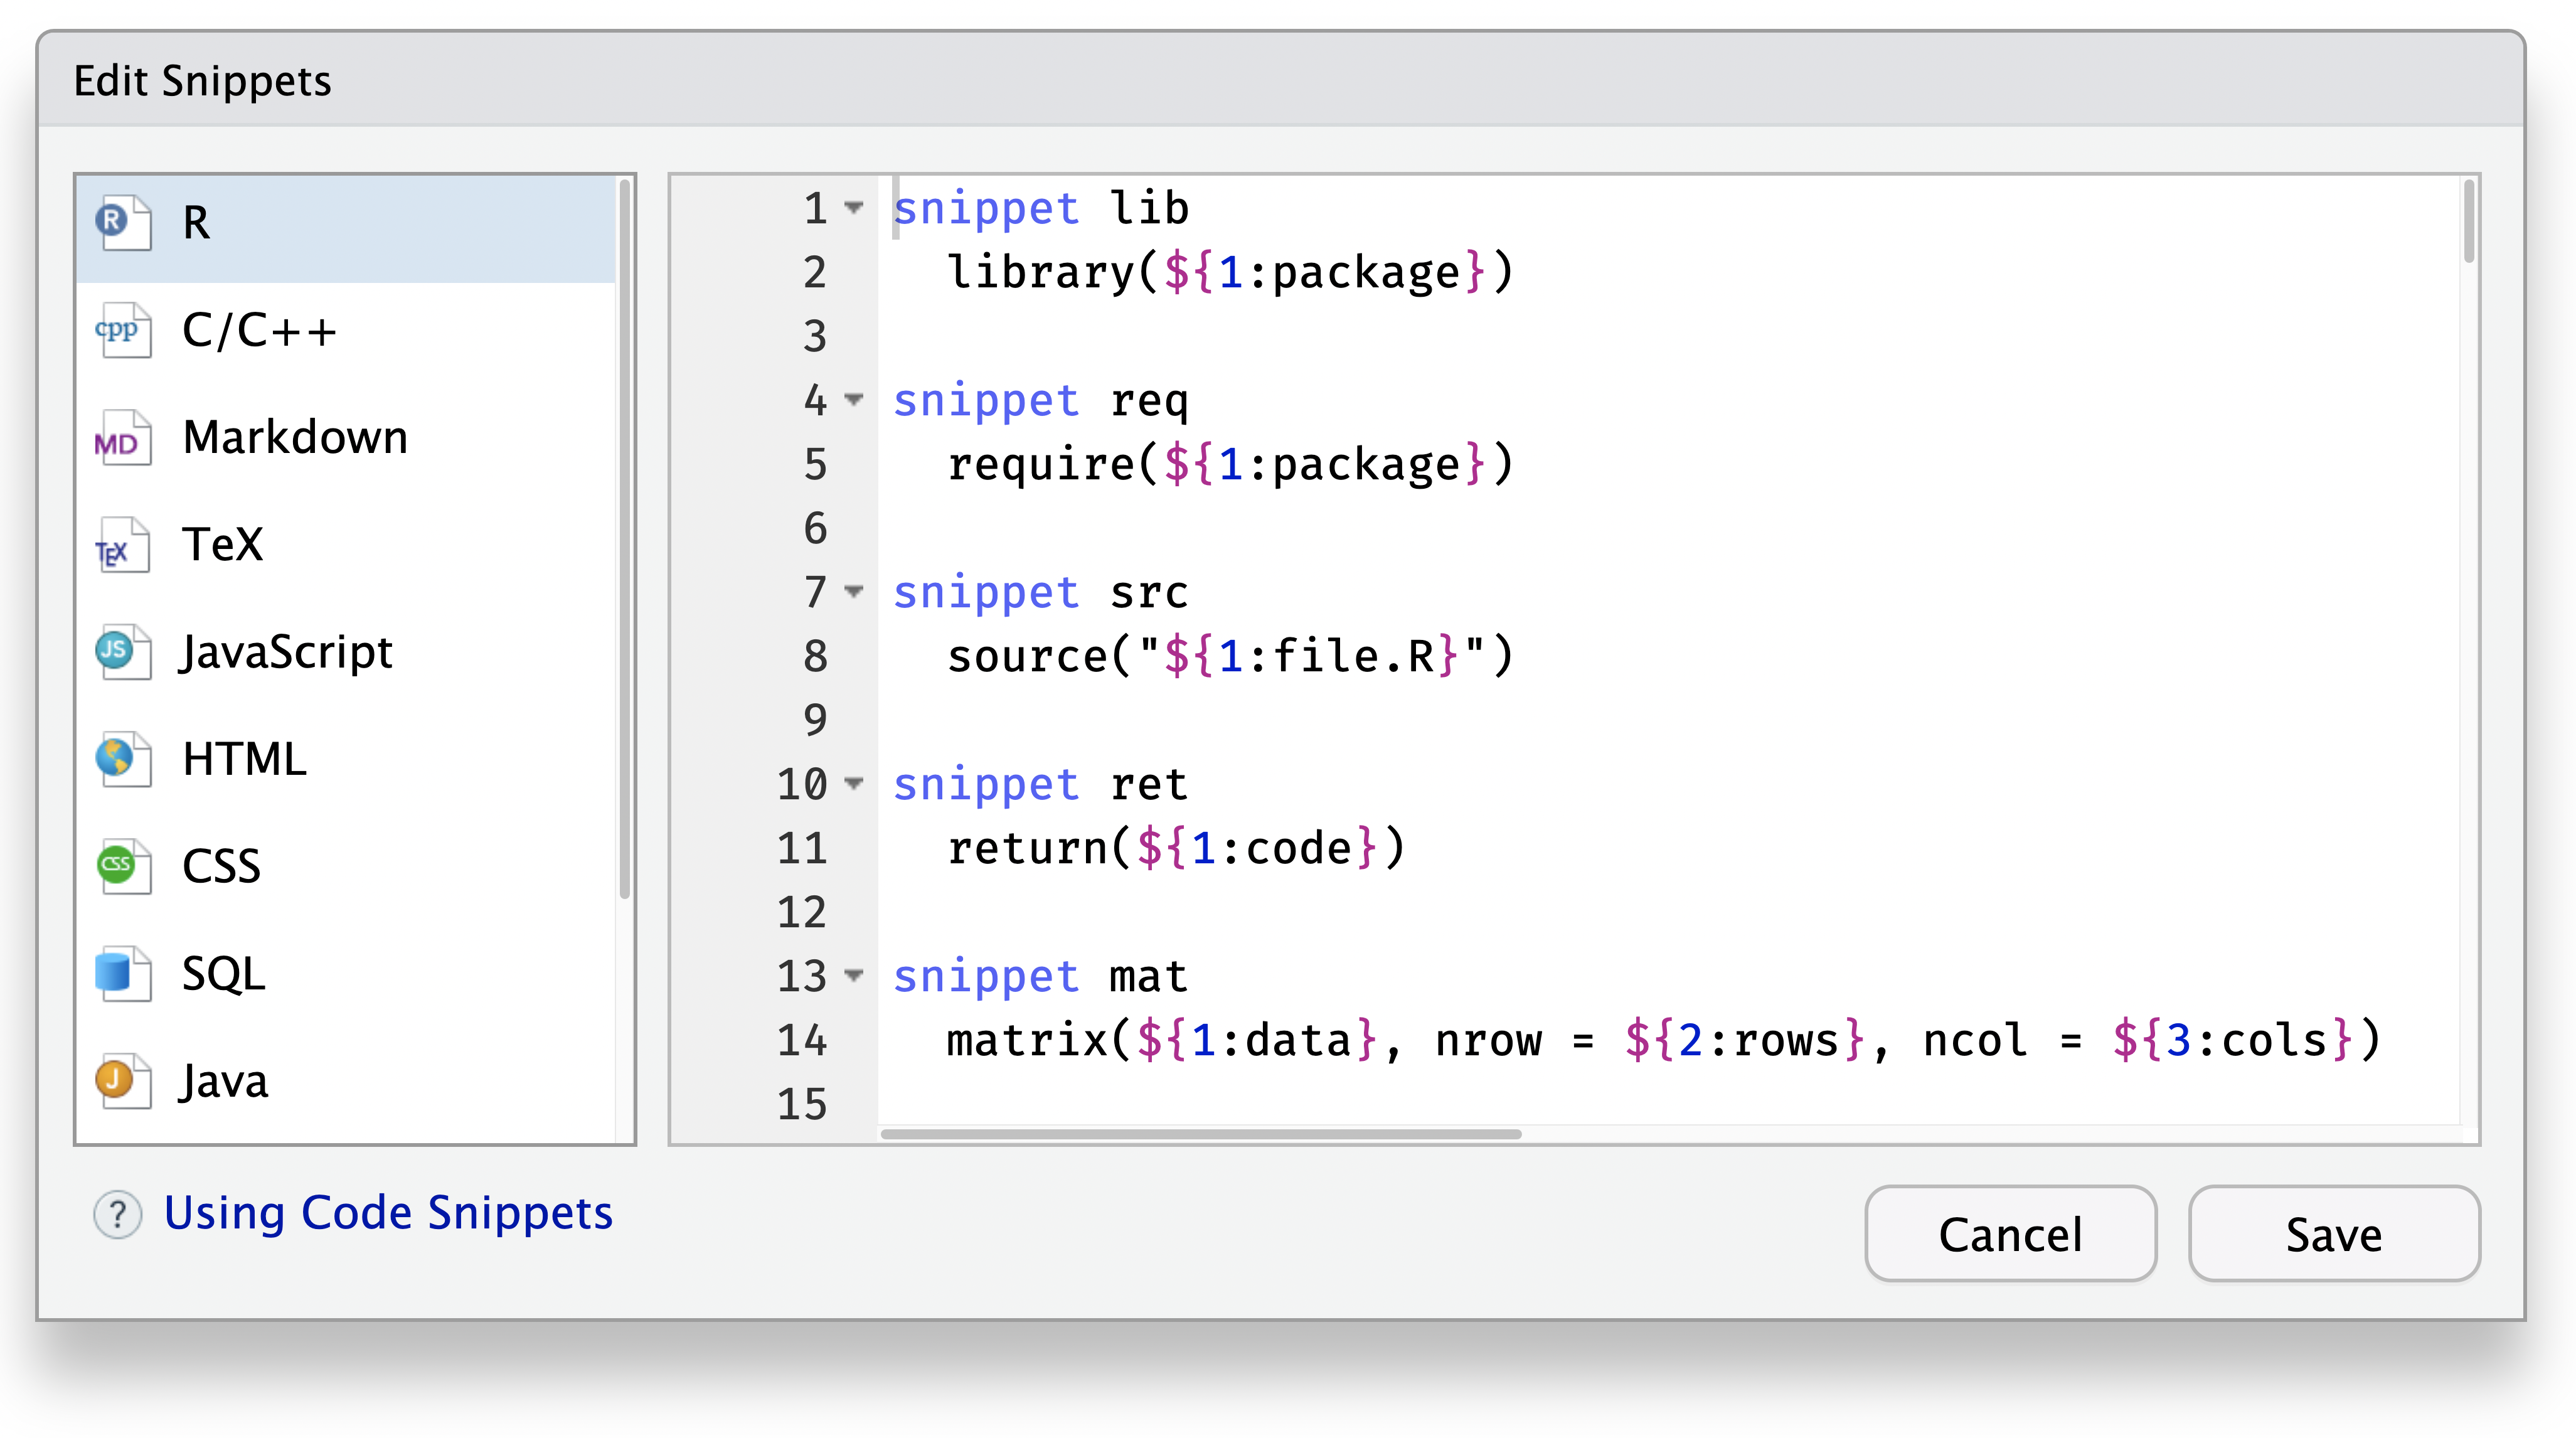 A screenshot of the Edit Snippets wizard, displaying the snippets for R.